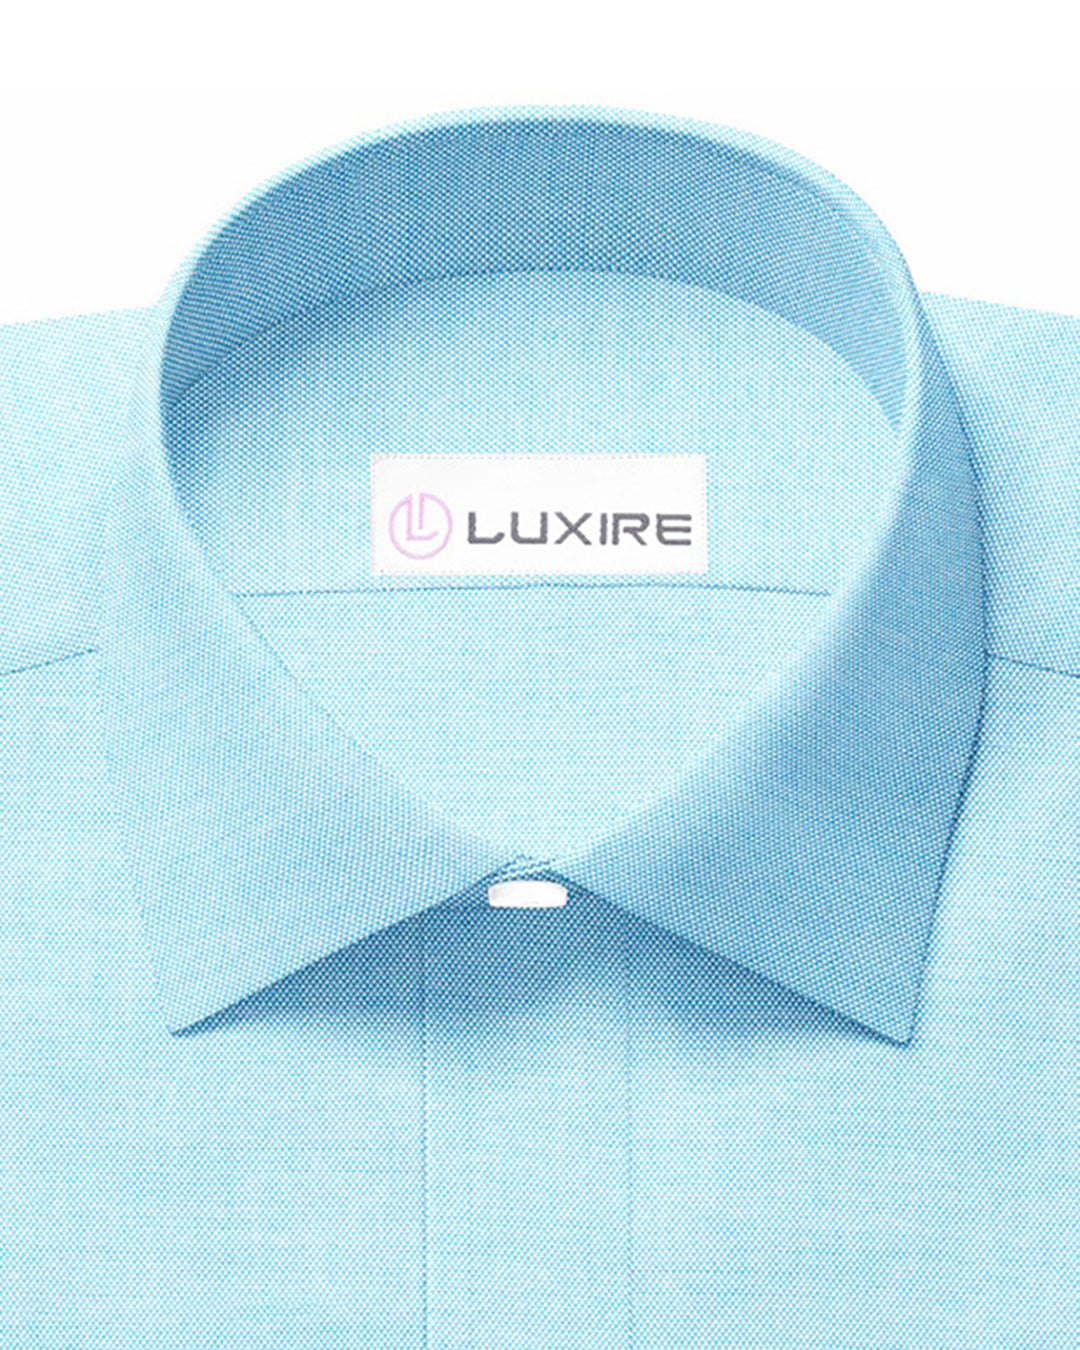 Turquoise Oxford Shirt